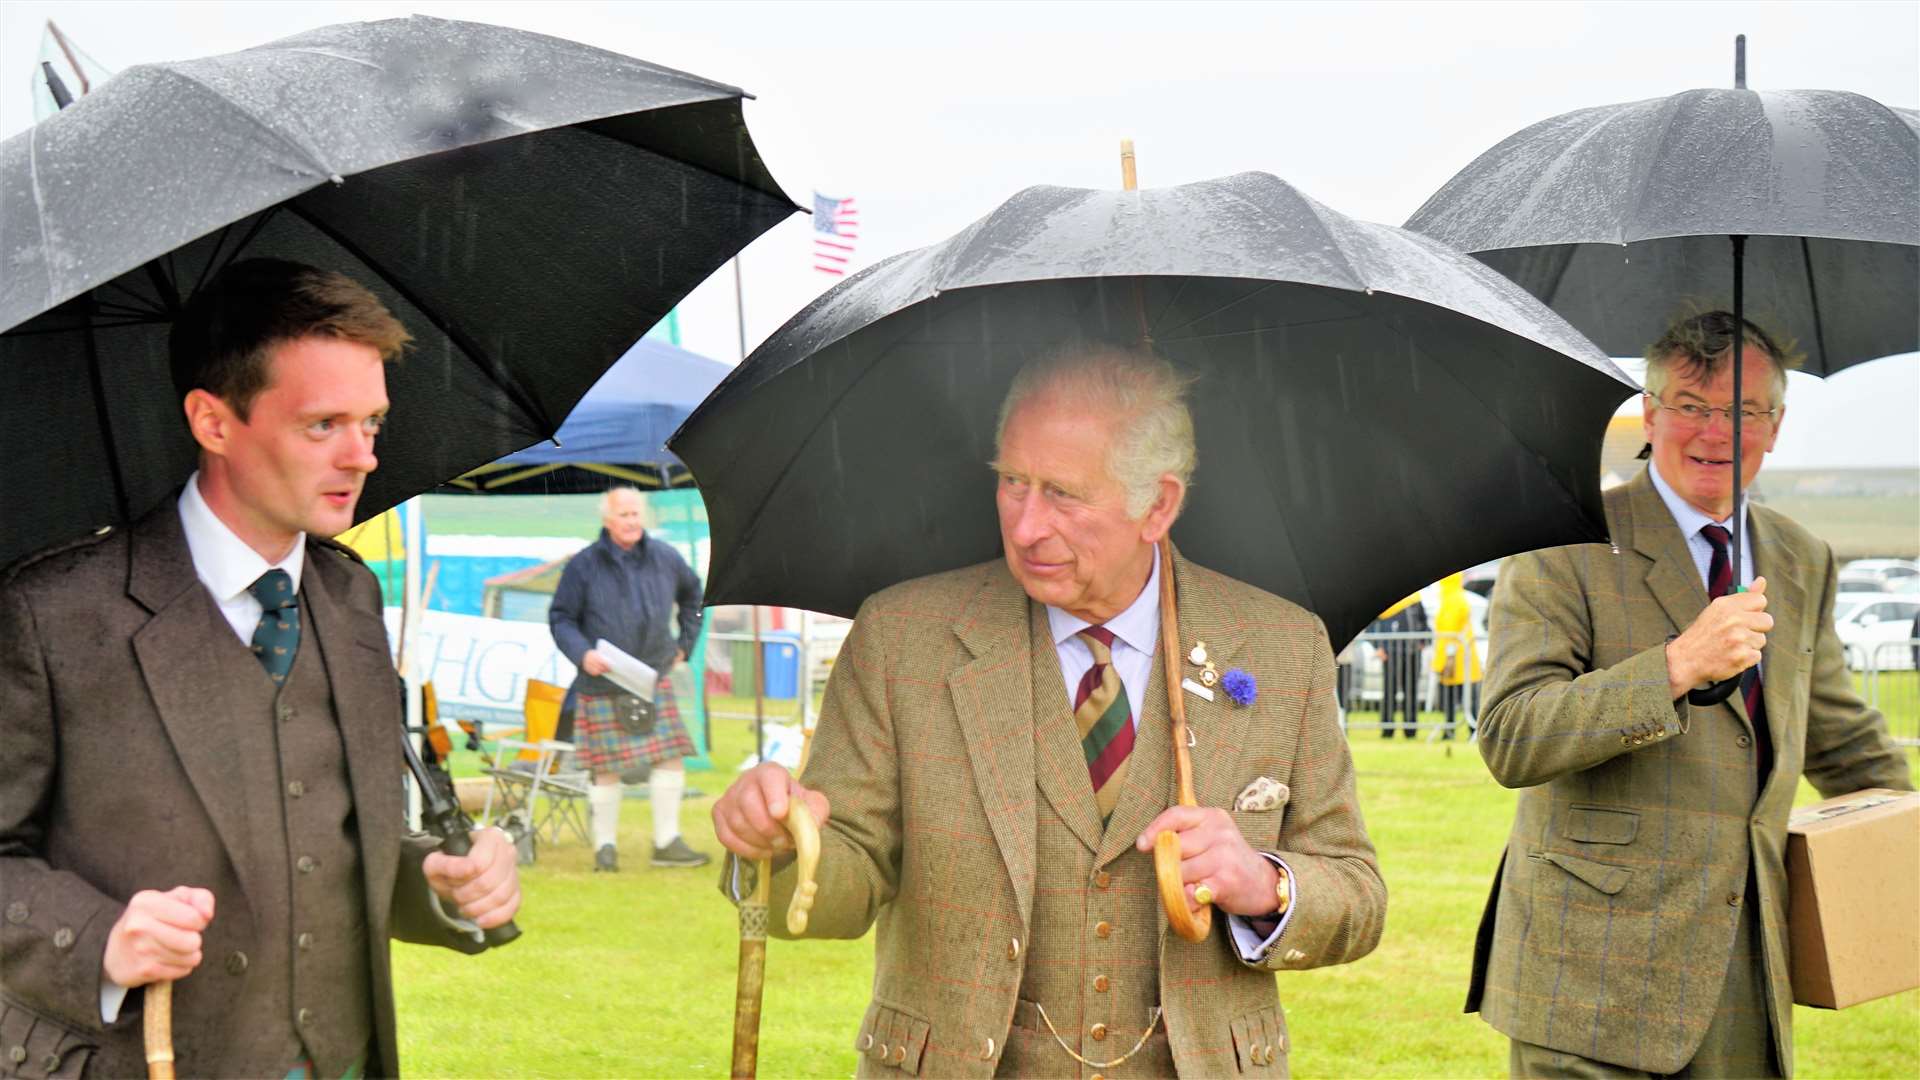 Ashe Windham, at right, along with Prince Charles and Mey Games chair Andrew Sinclair. Picture: DGS